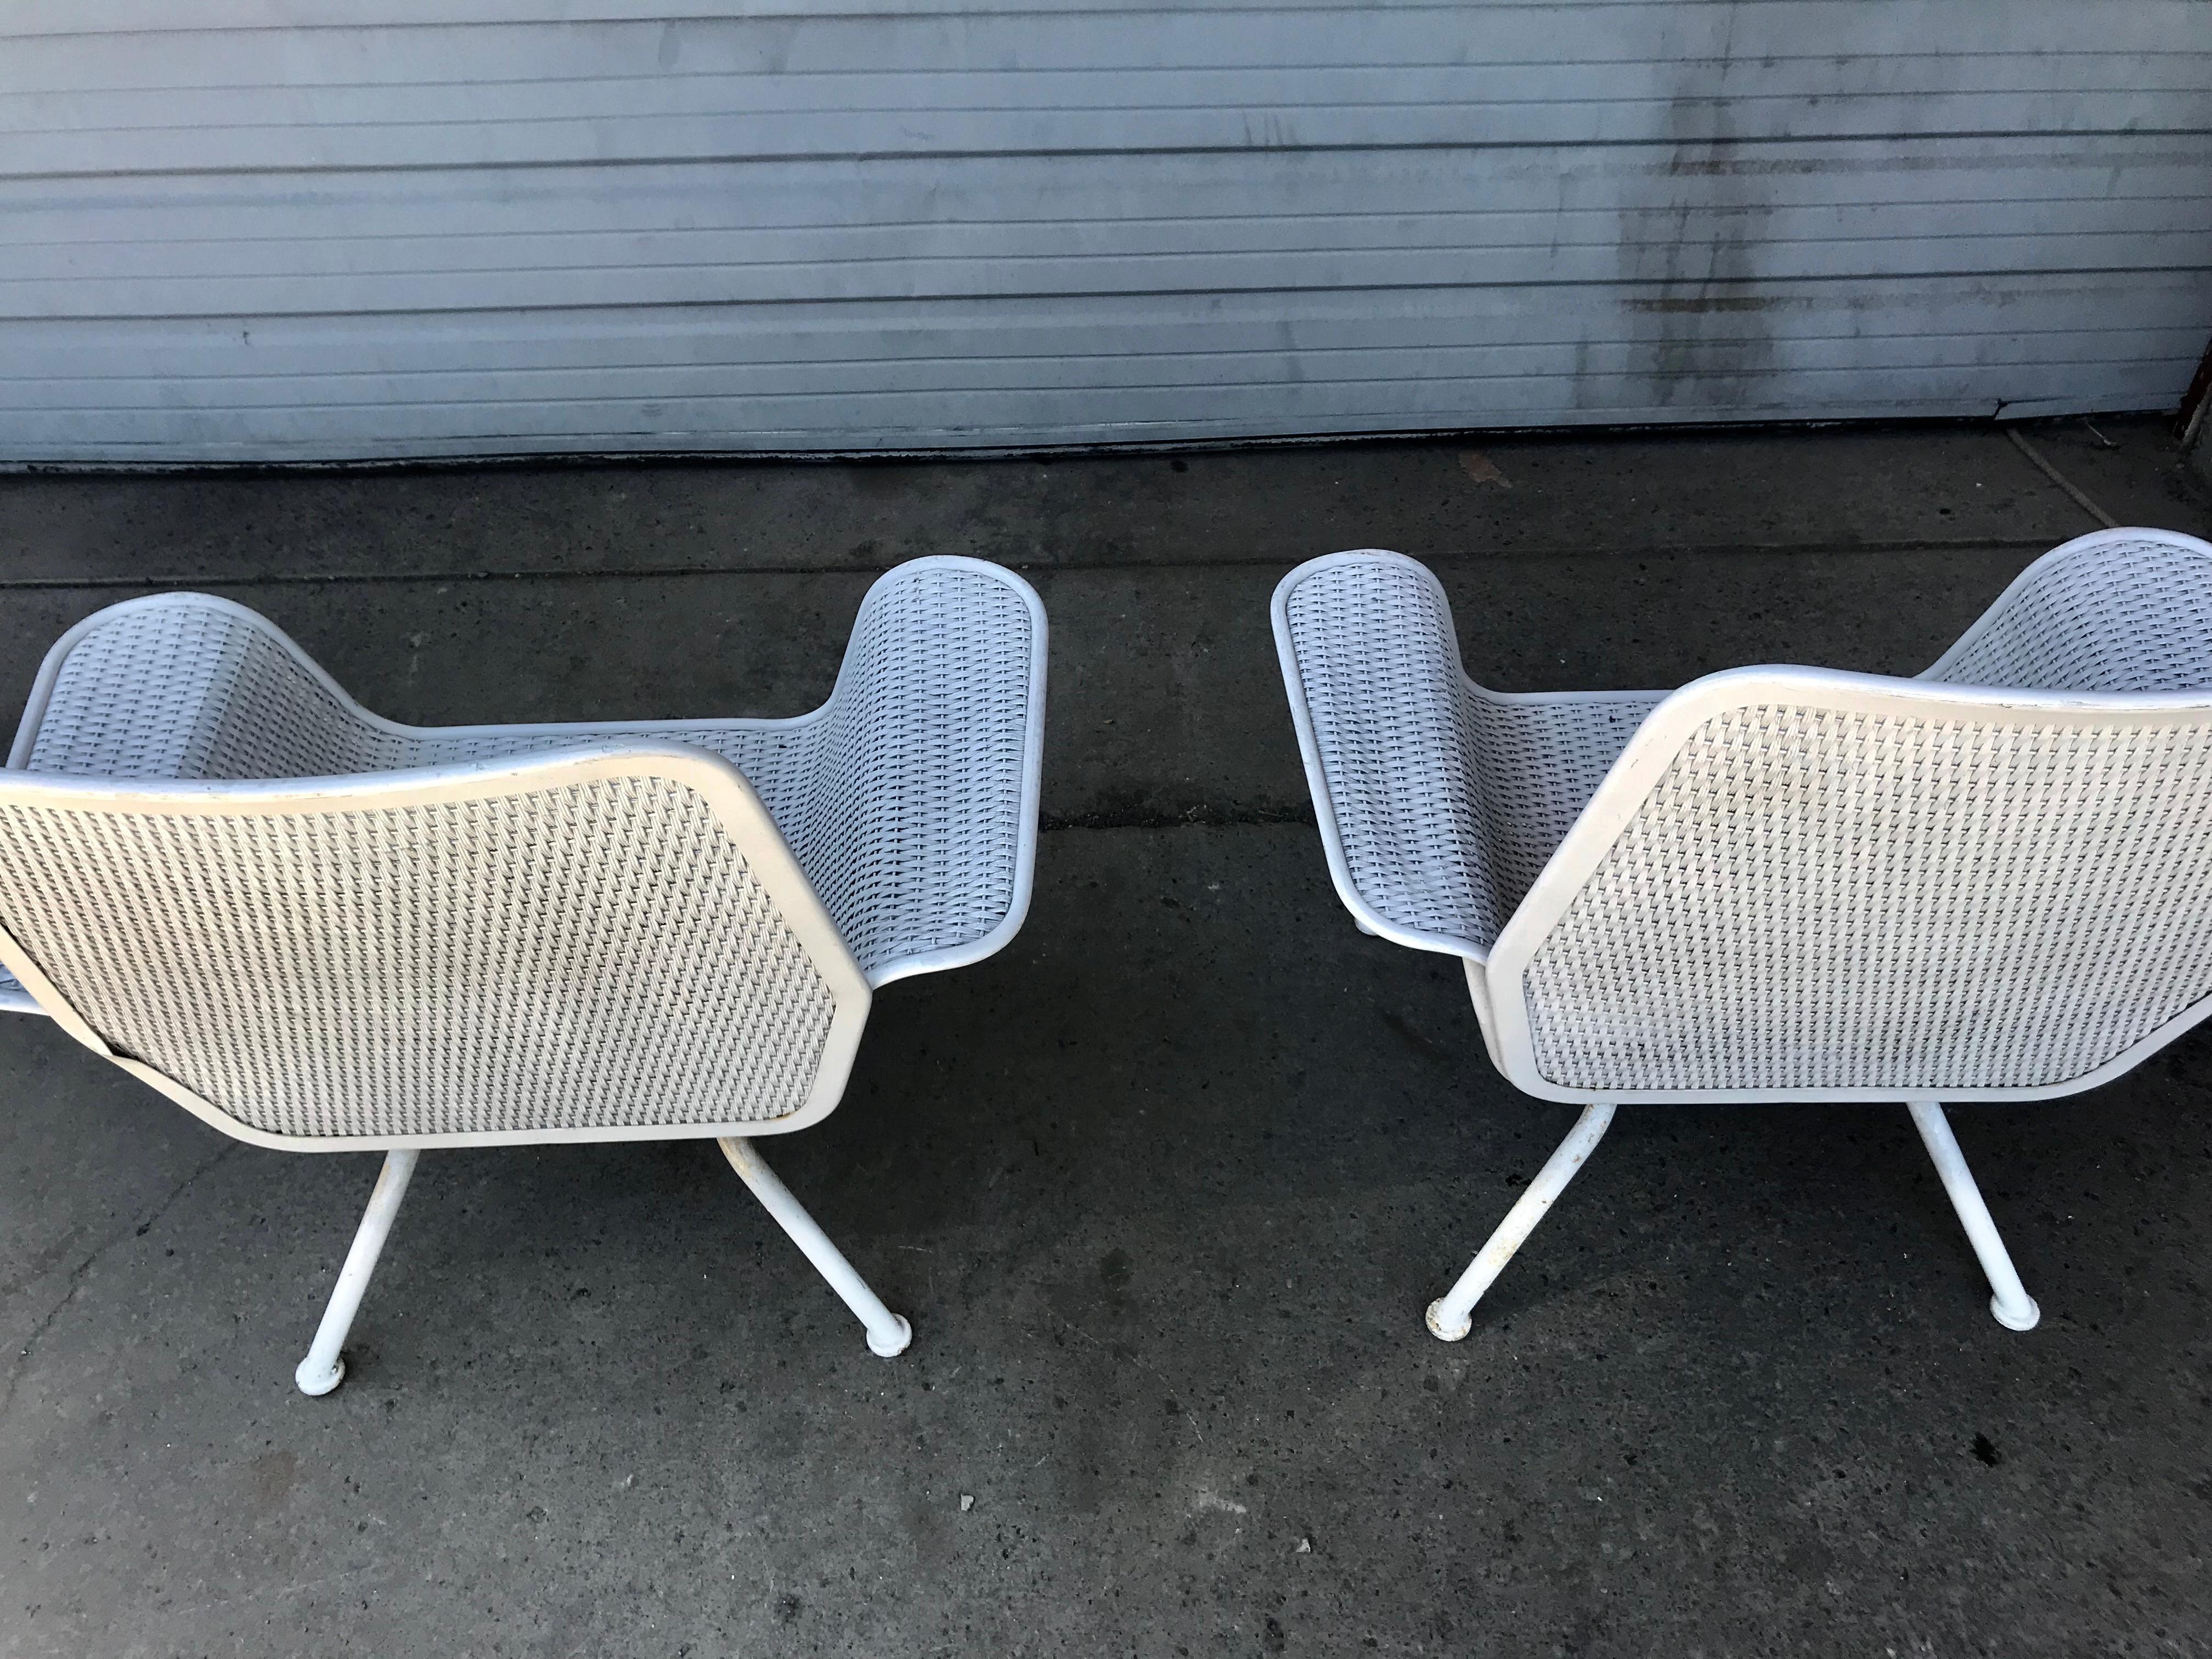 Pair of Mid-Century Modern Wicker and Metal Outdoor Lounge Chairs, Woodard 4